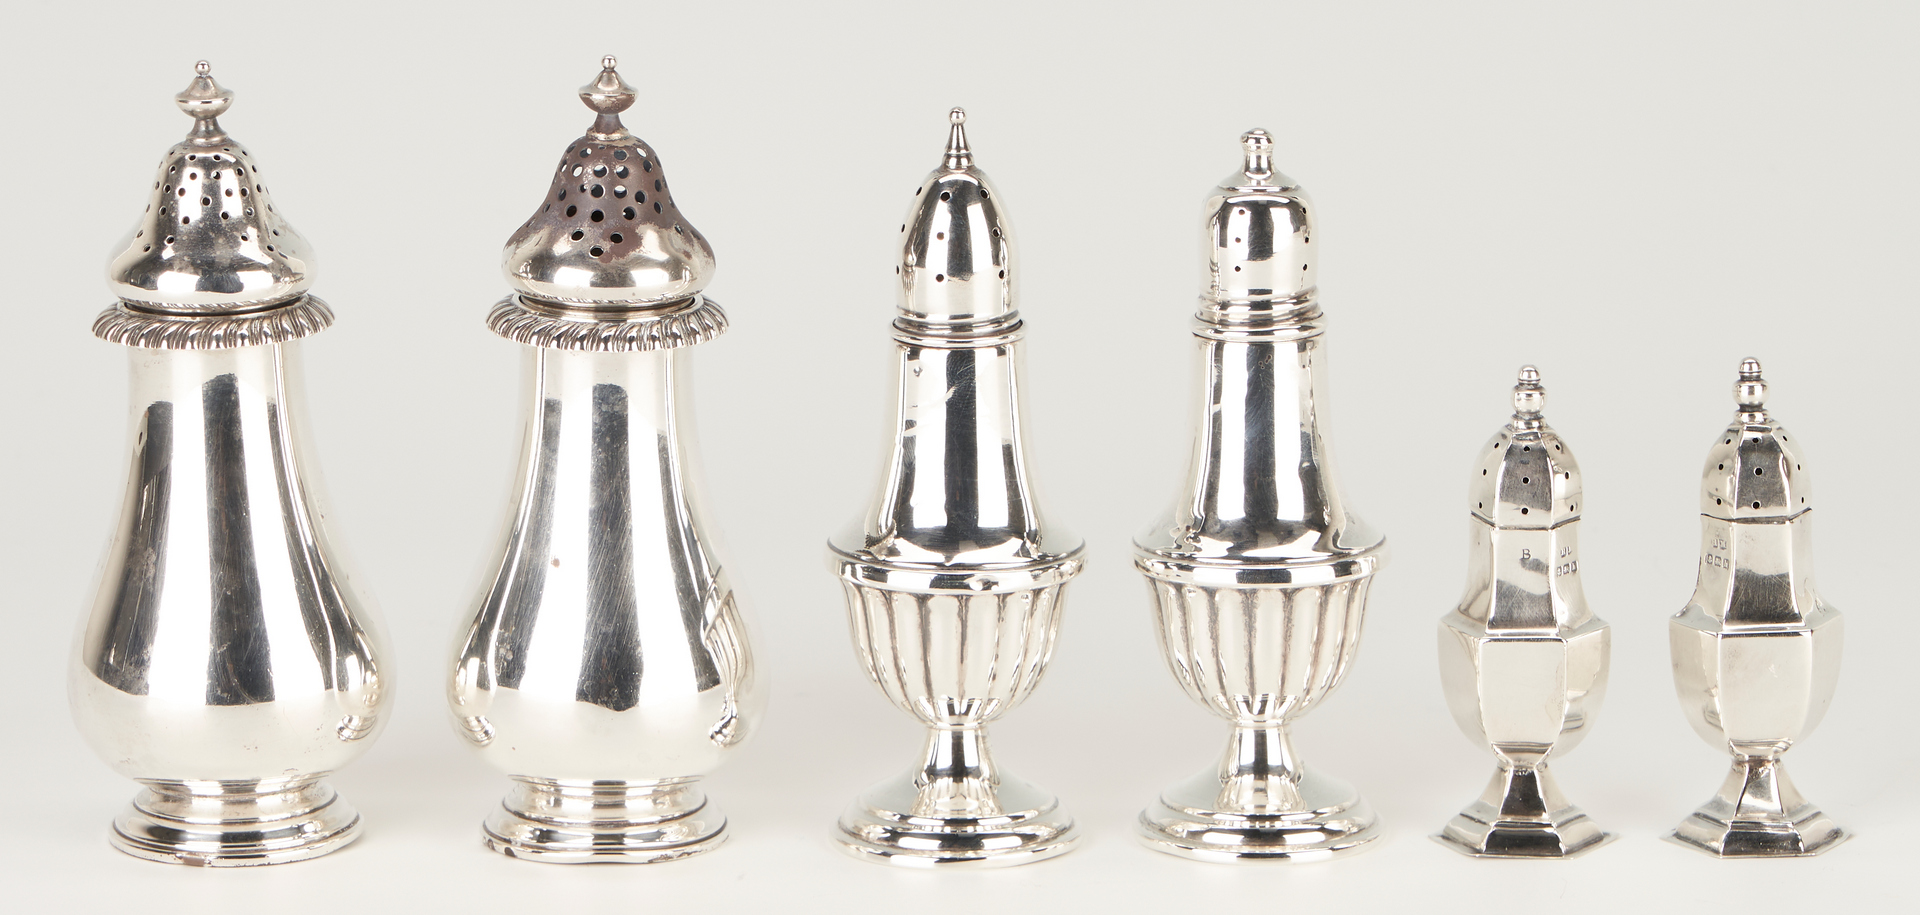 Lot 1239: 30 pcs Sterling including Salt and Pepper Shakers